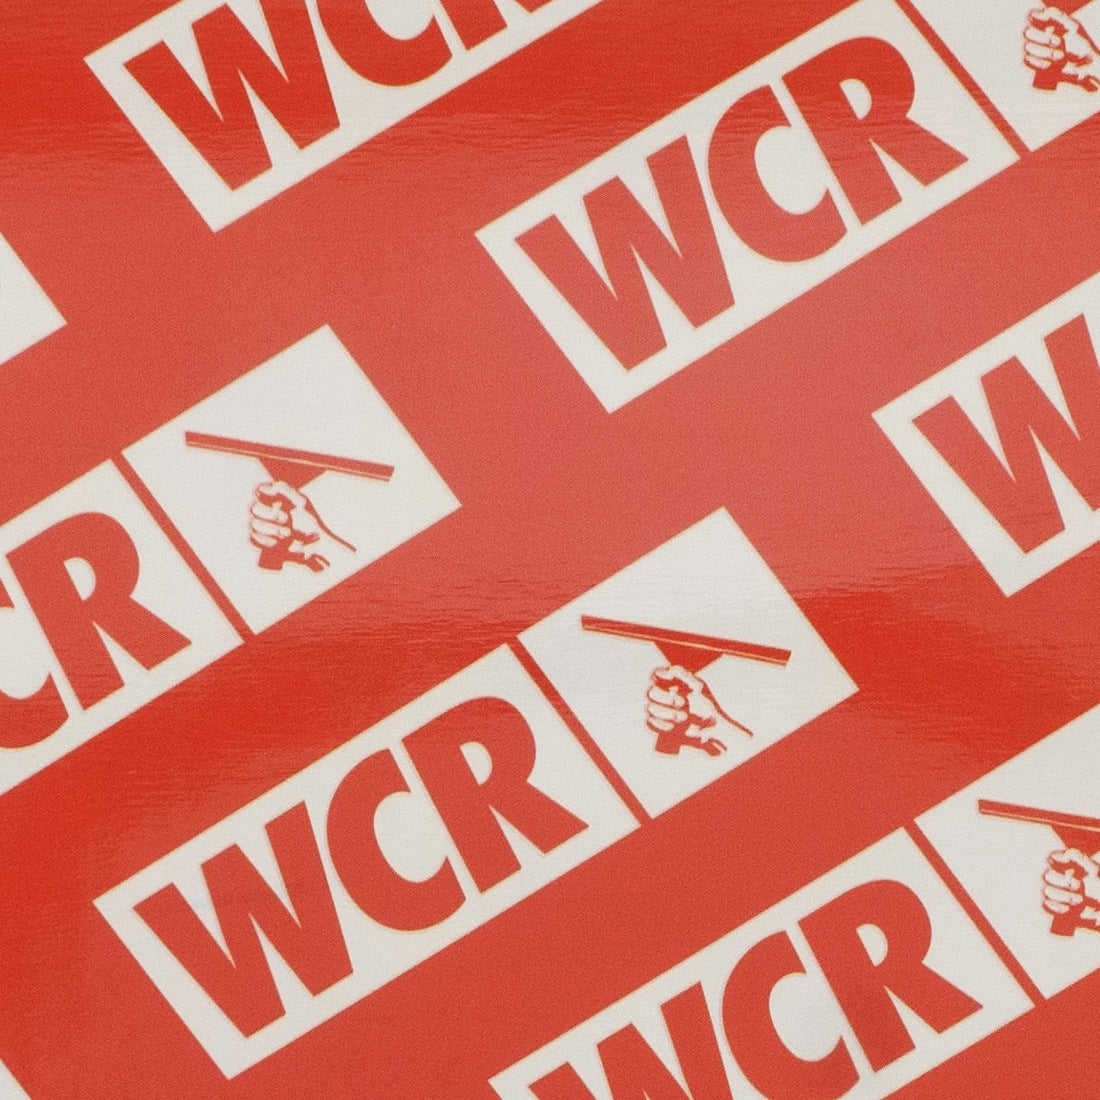 WCR Skateboard Deck - Repeat Logo Zoom View